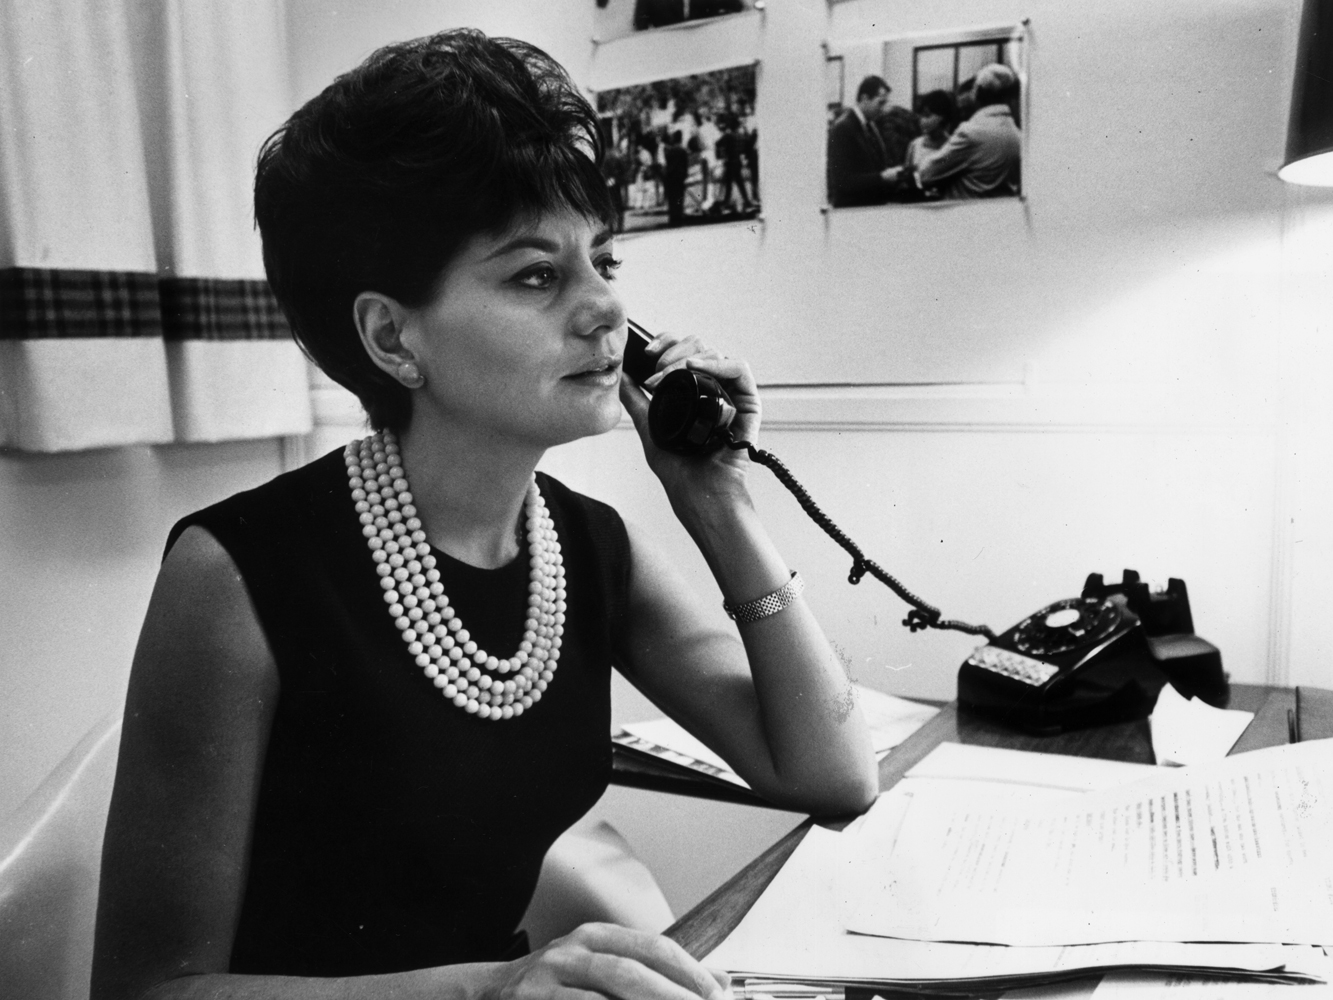 NBC's Barbara Walters takes a phone call at her desk in New York City, circa 1964.